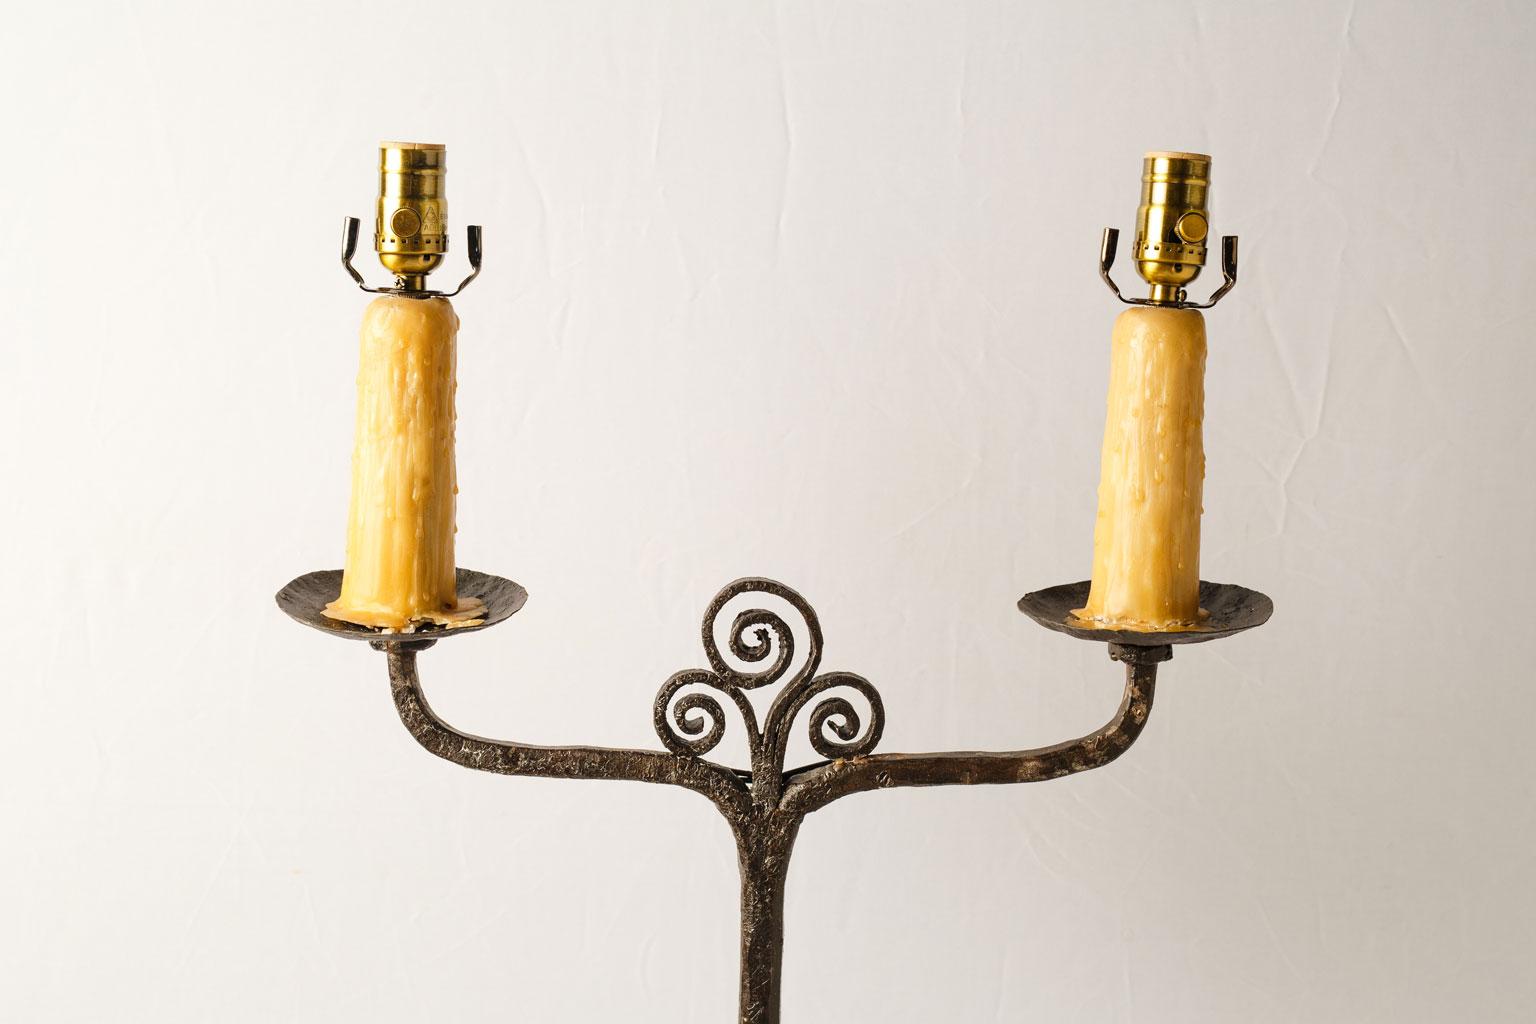 Two-socket candle stand floor lamp from France. A fine hammered, forged iron candle stand newly wired for use within the USA as a custom floor lamp. Two sockets accommodating medium-size (Edison) bulbs. Playful wrought iron swirl decoration and